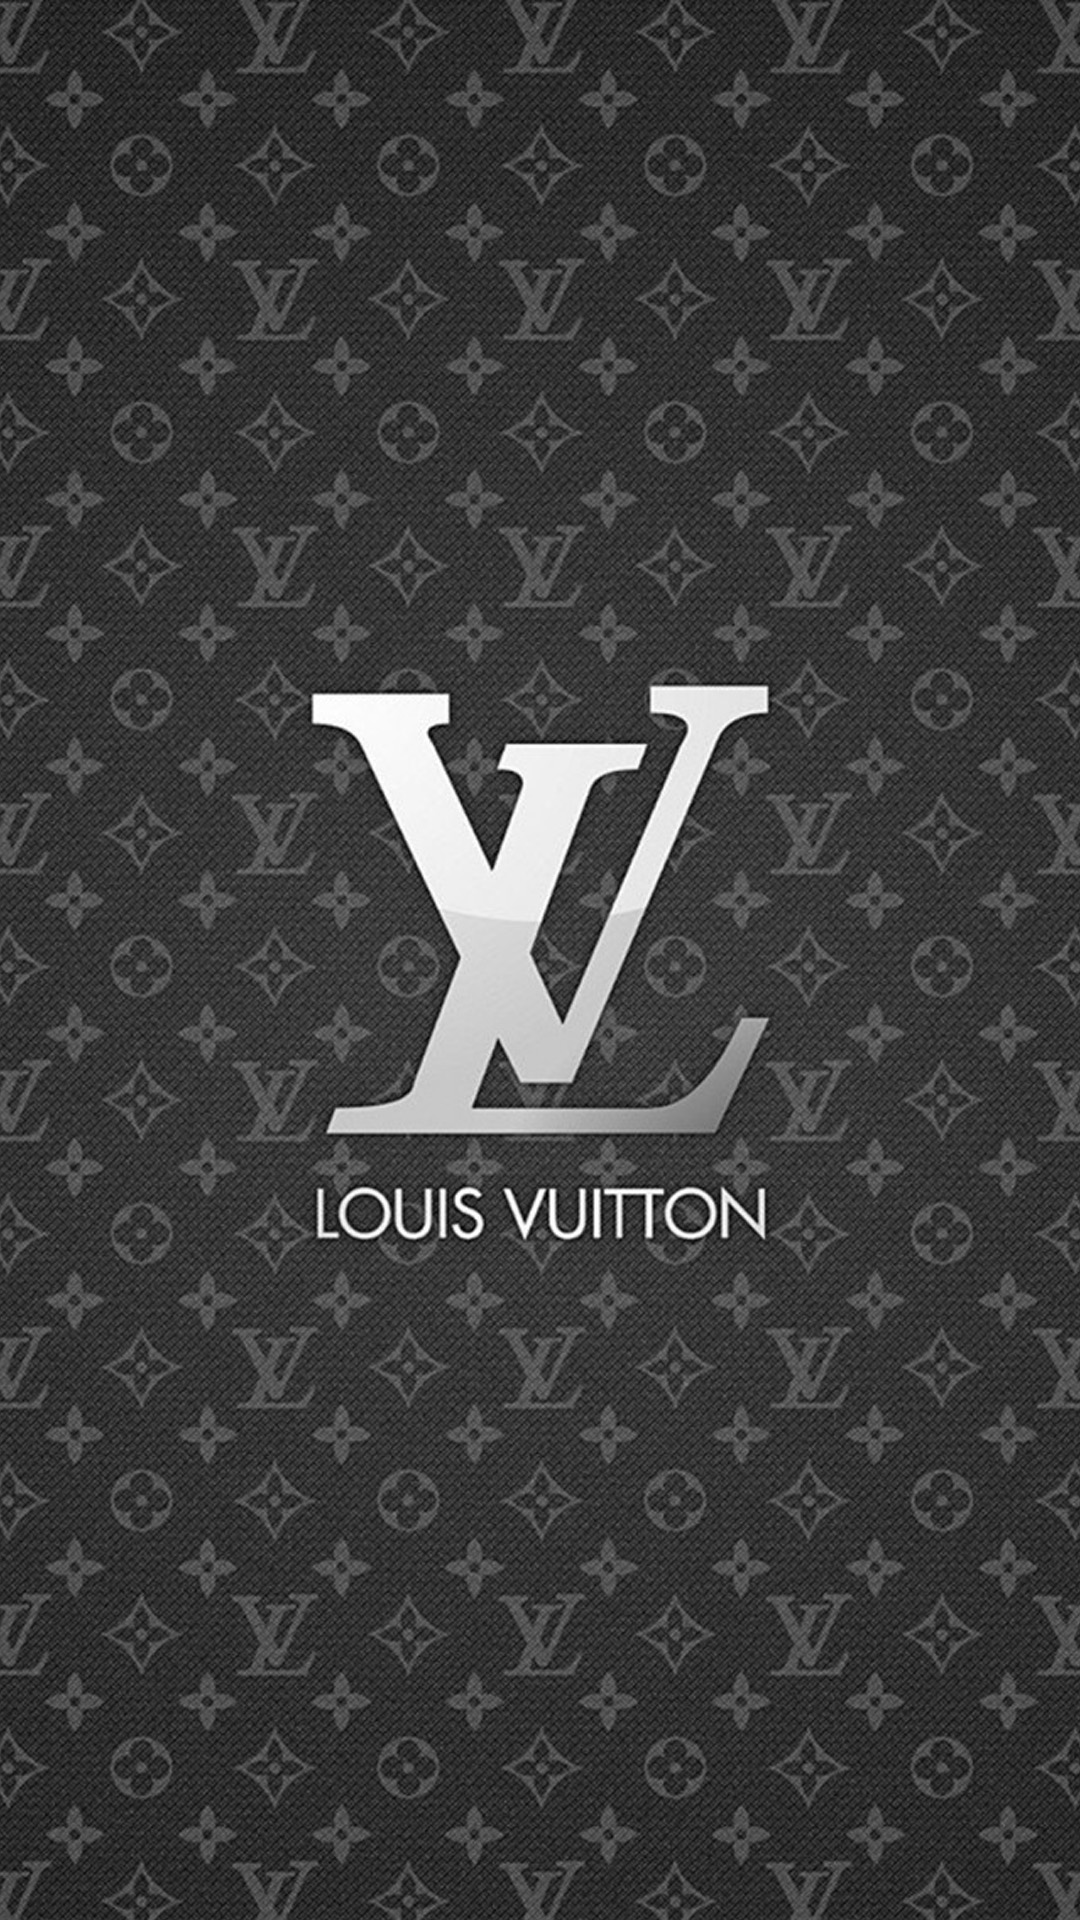 Louis Vuitton Monogram Canvas Black And White Iphone Wallpapers